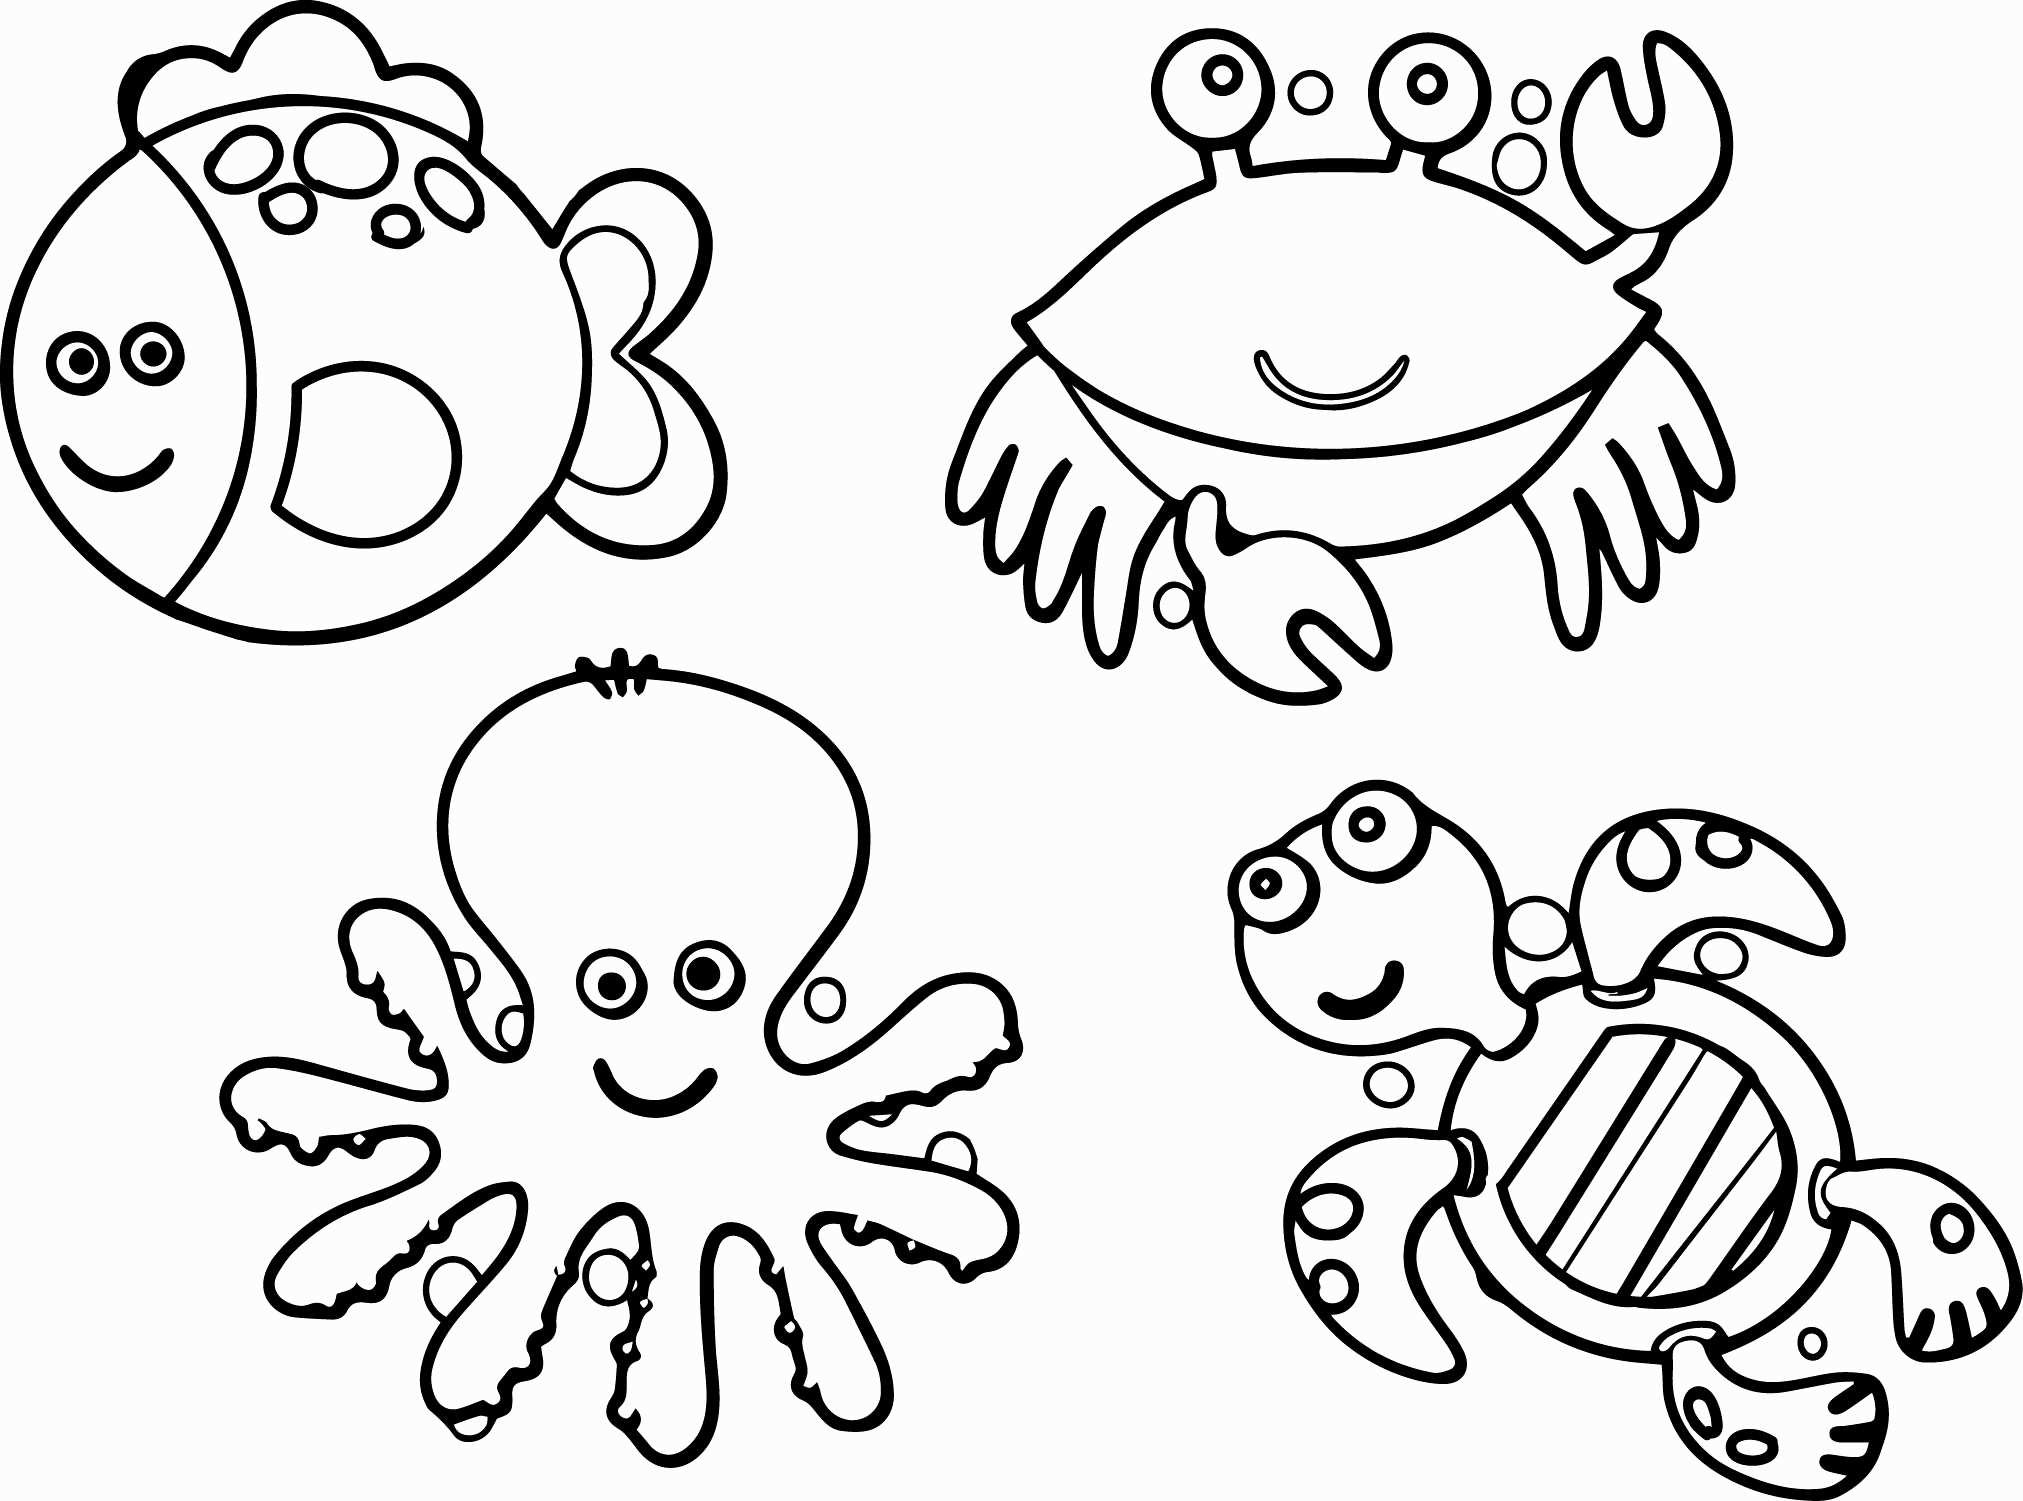 Printable Animal Coloring Pages Best Free Printable Animal Coloring Pages Unique Ocean Animals Coloring